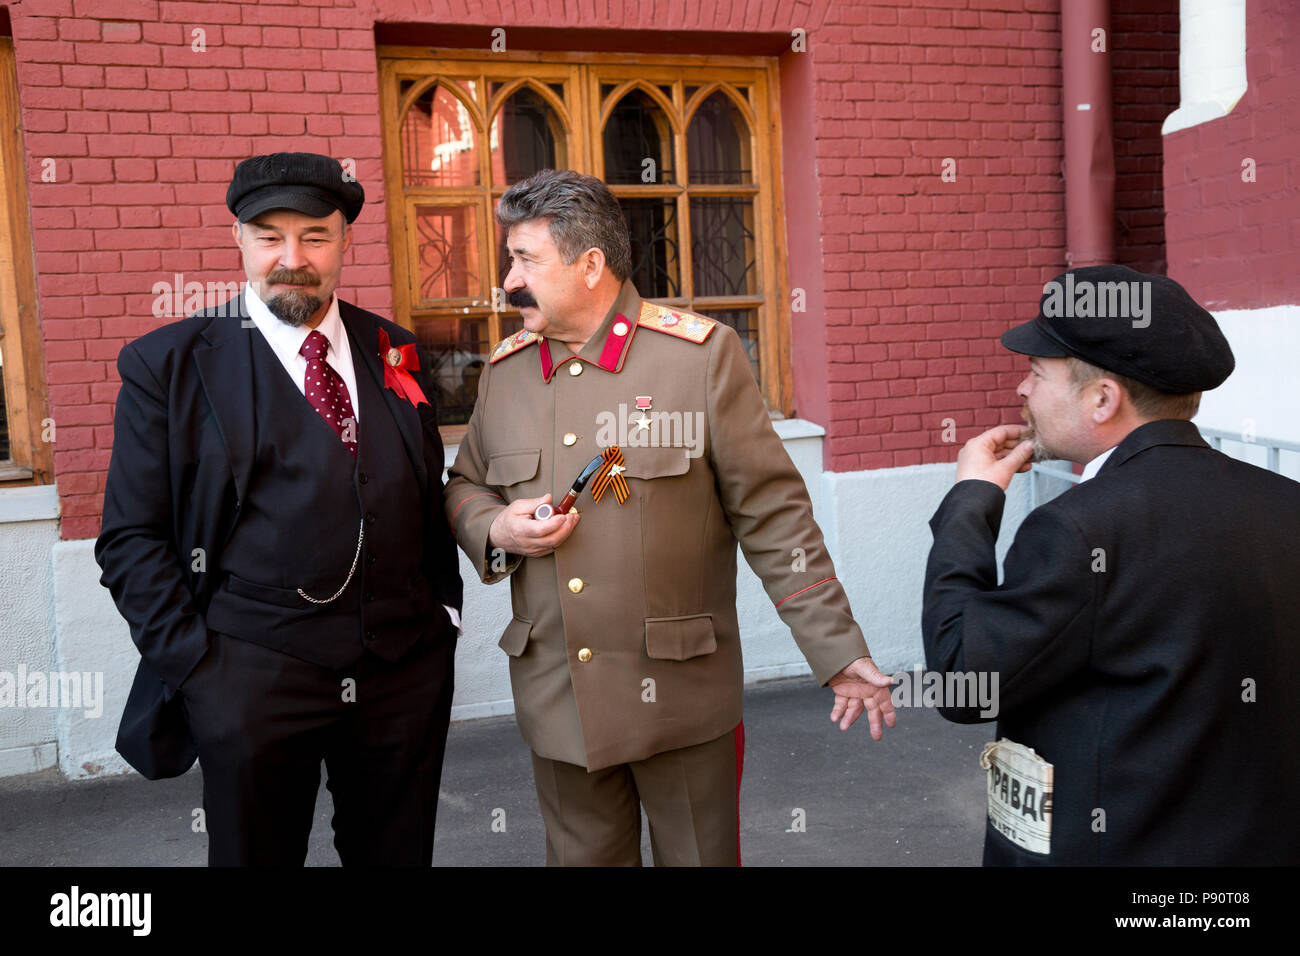 Impersonators of Lenin and Stalin on Red square, which is a very popular tourist place, in the heart of Moscow, Russia Stock Photo